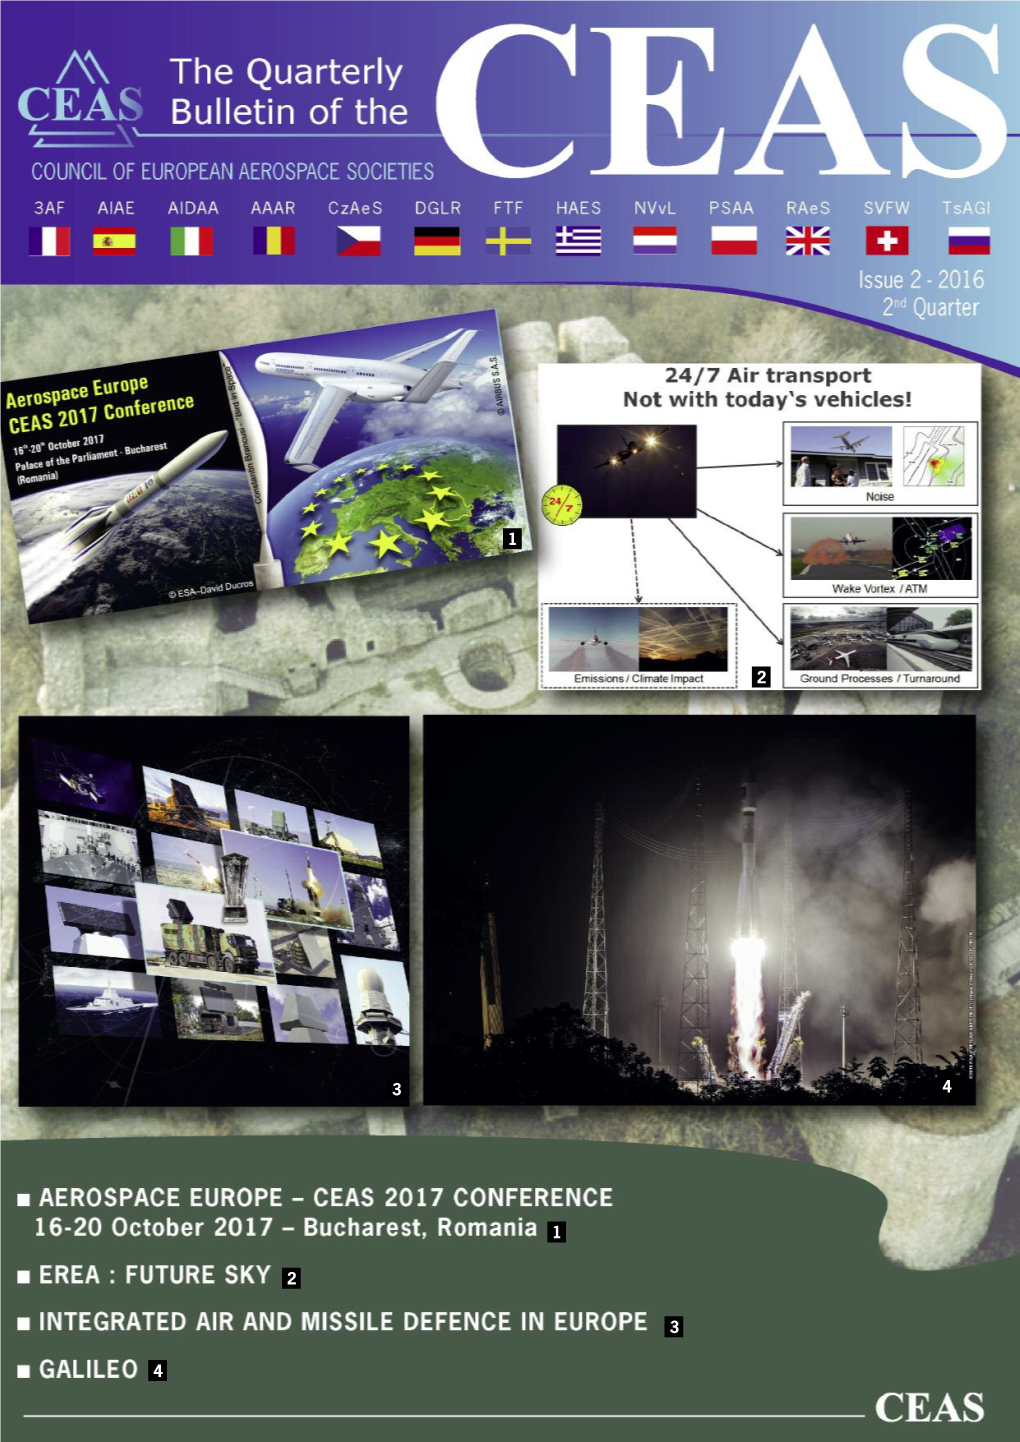 Integrated Anti-Missile Air Defence (Iamd) in Europe: Complexity and Consensus ?